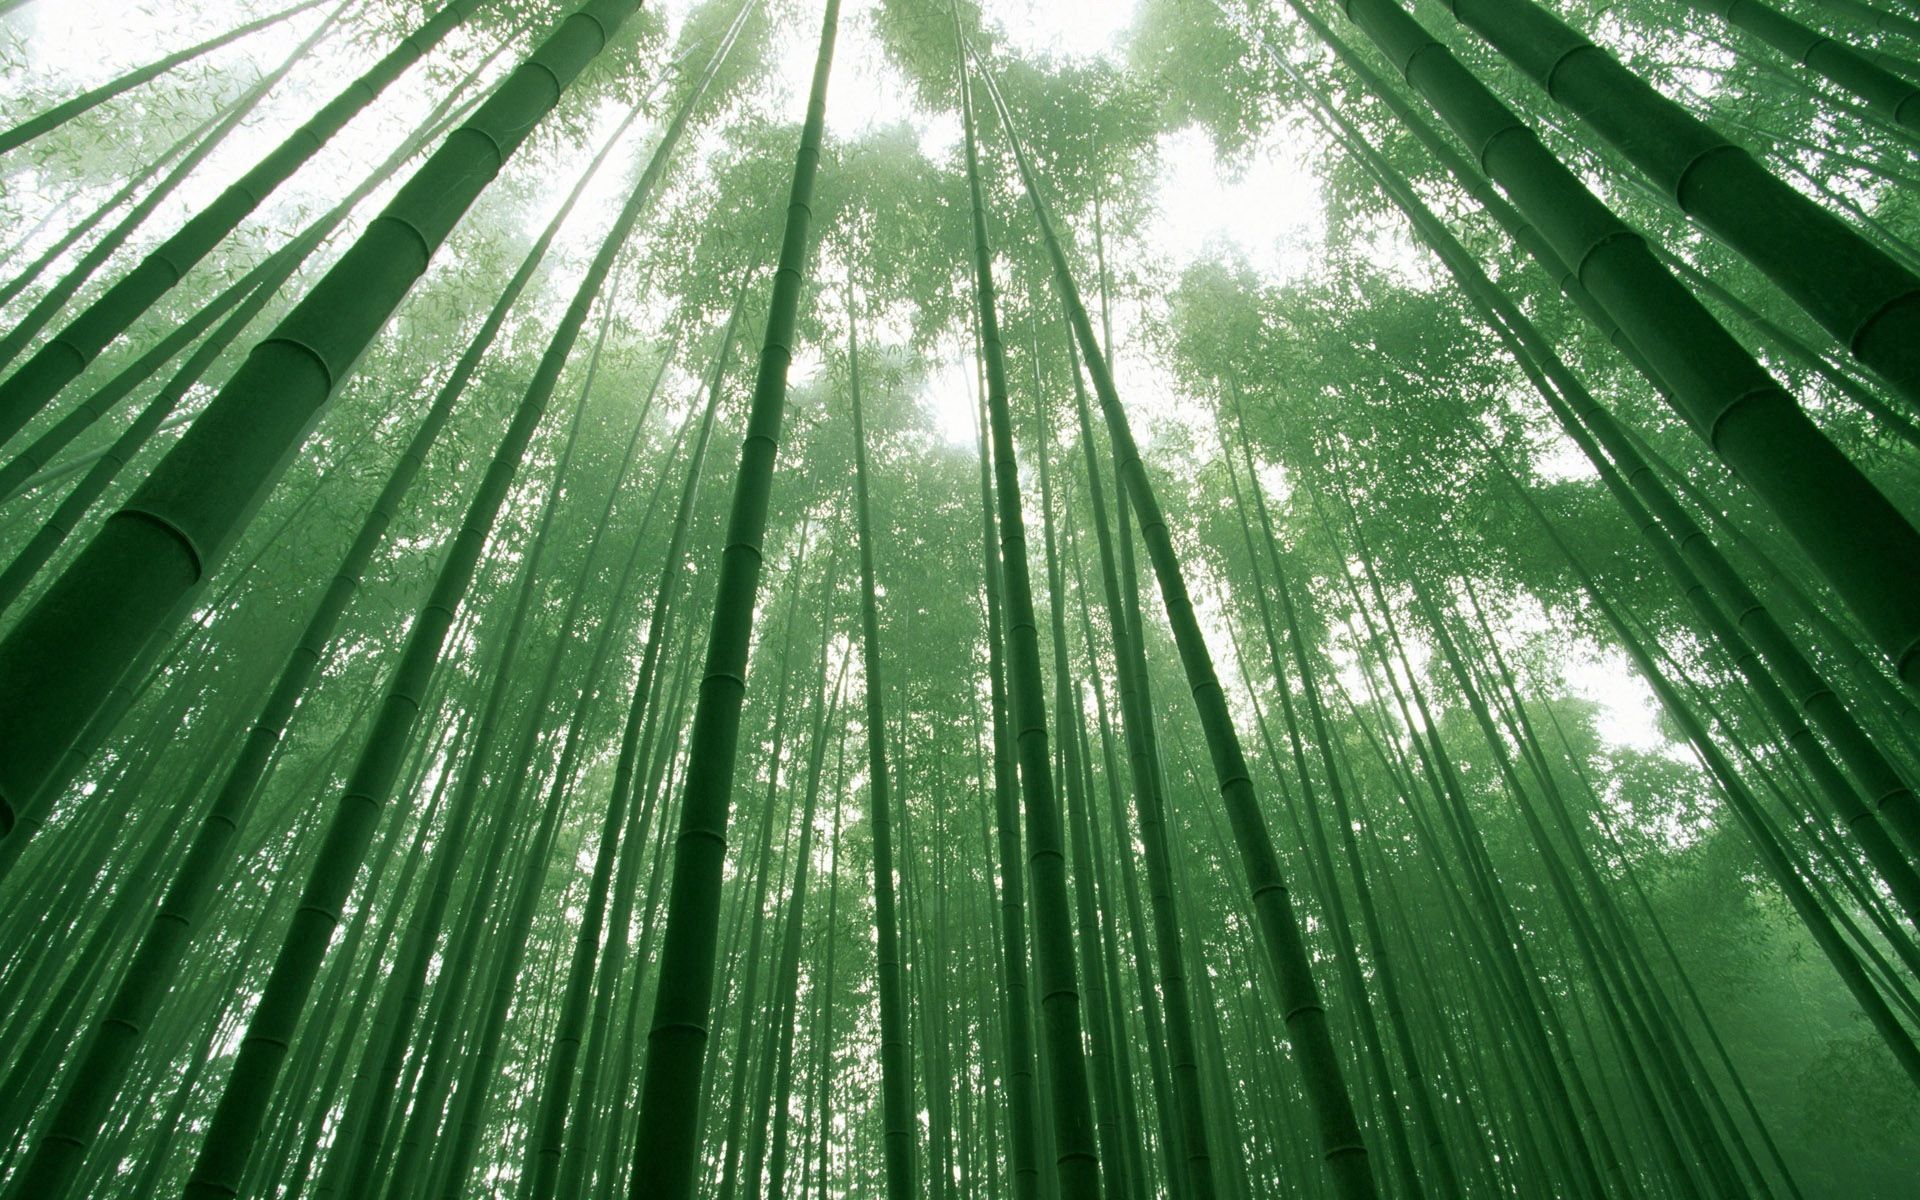 bamboo, stems, green, nature, sky, crown, crowns